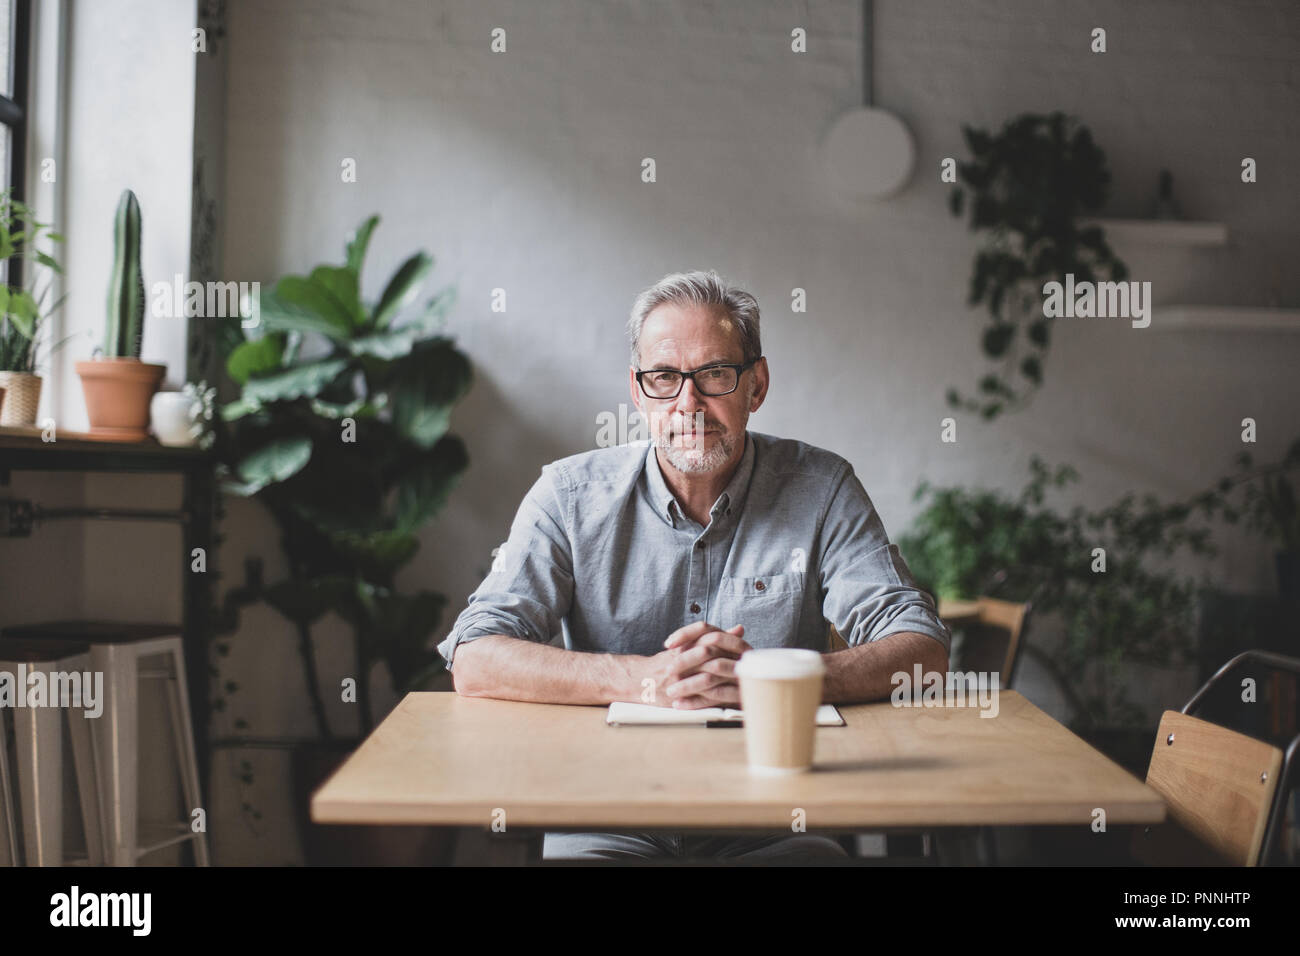 Portrait of mature businessman working in a cafe Stock Photo